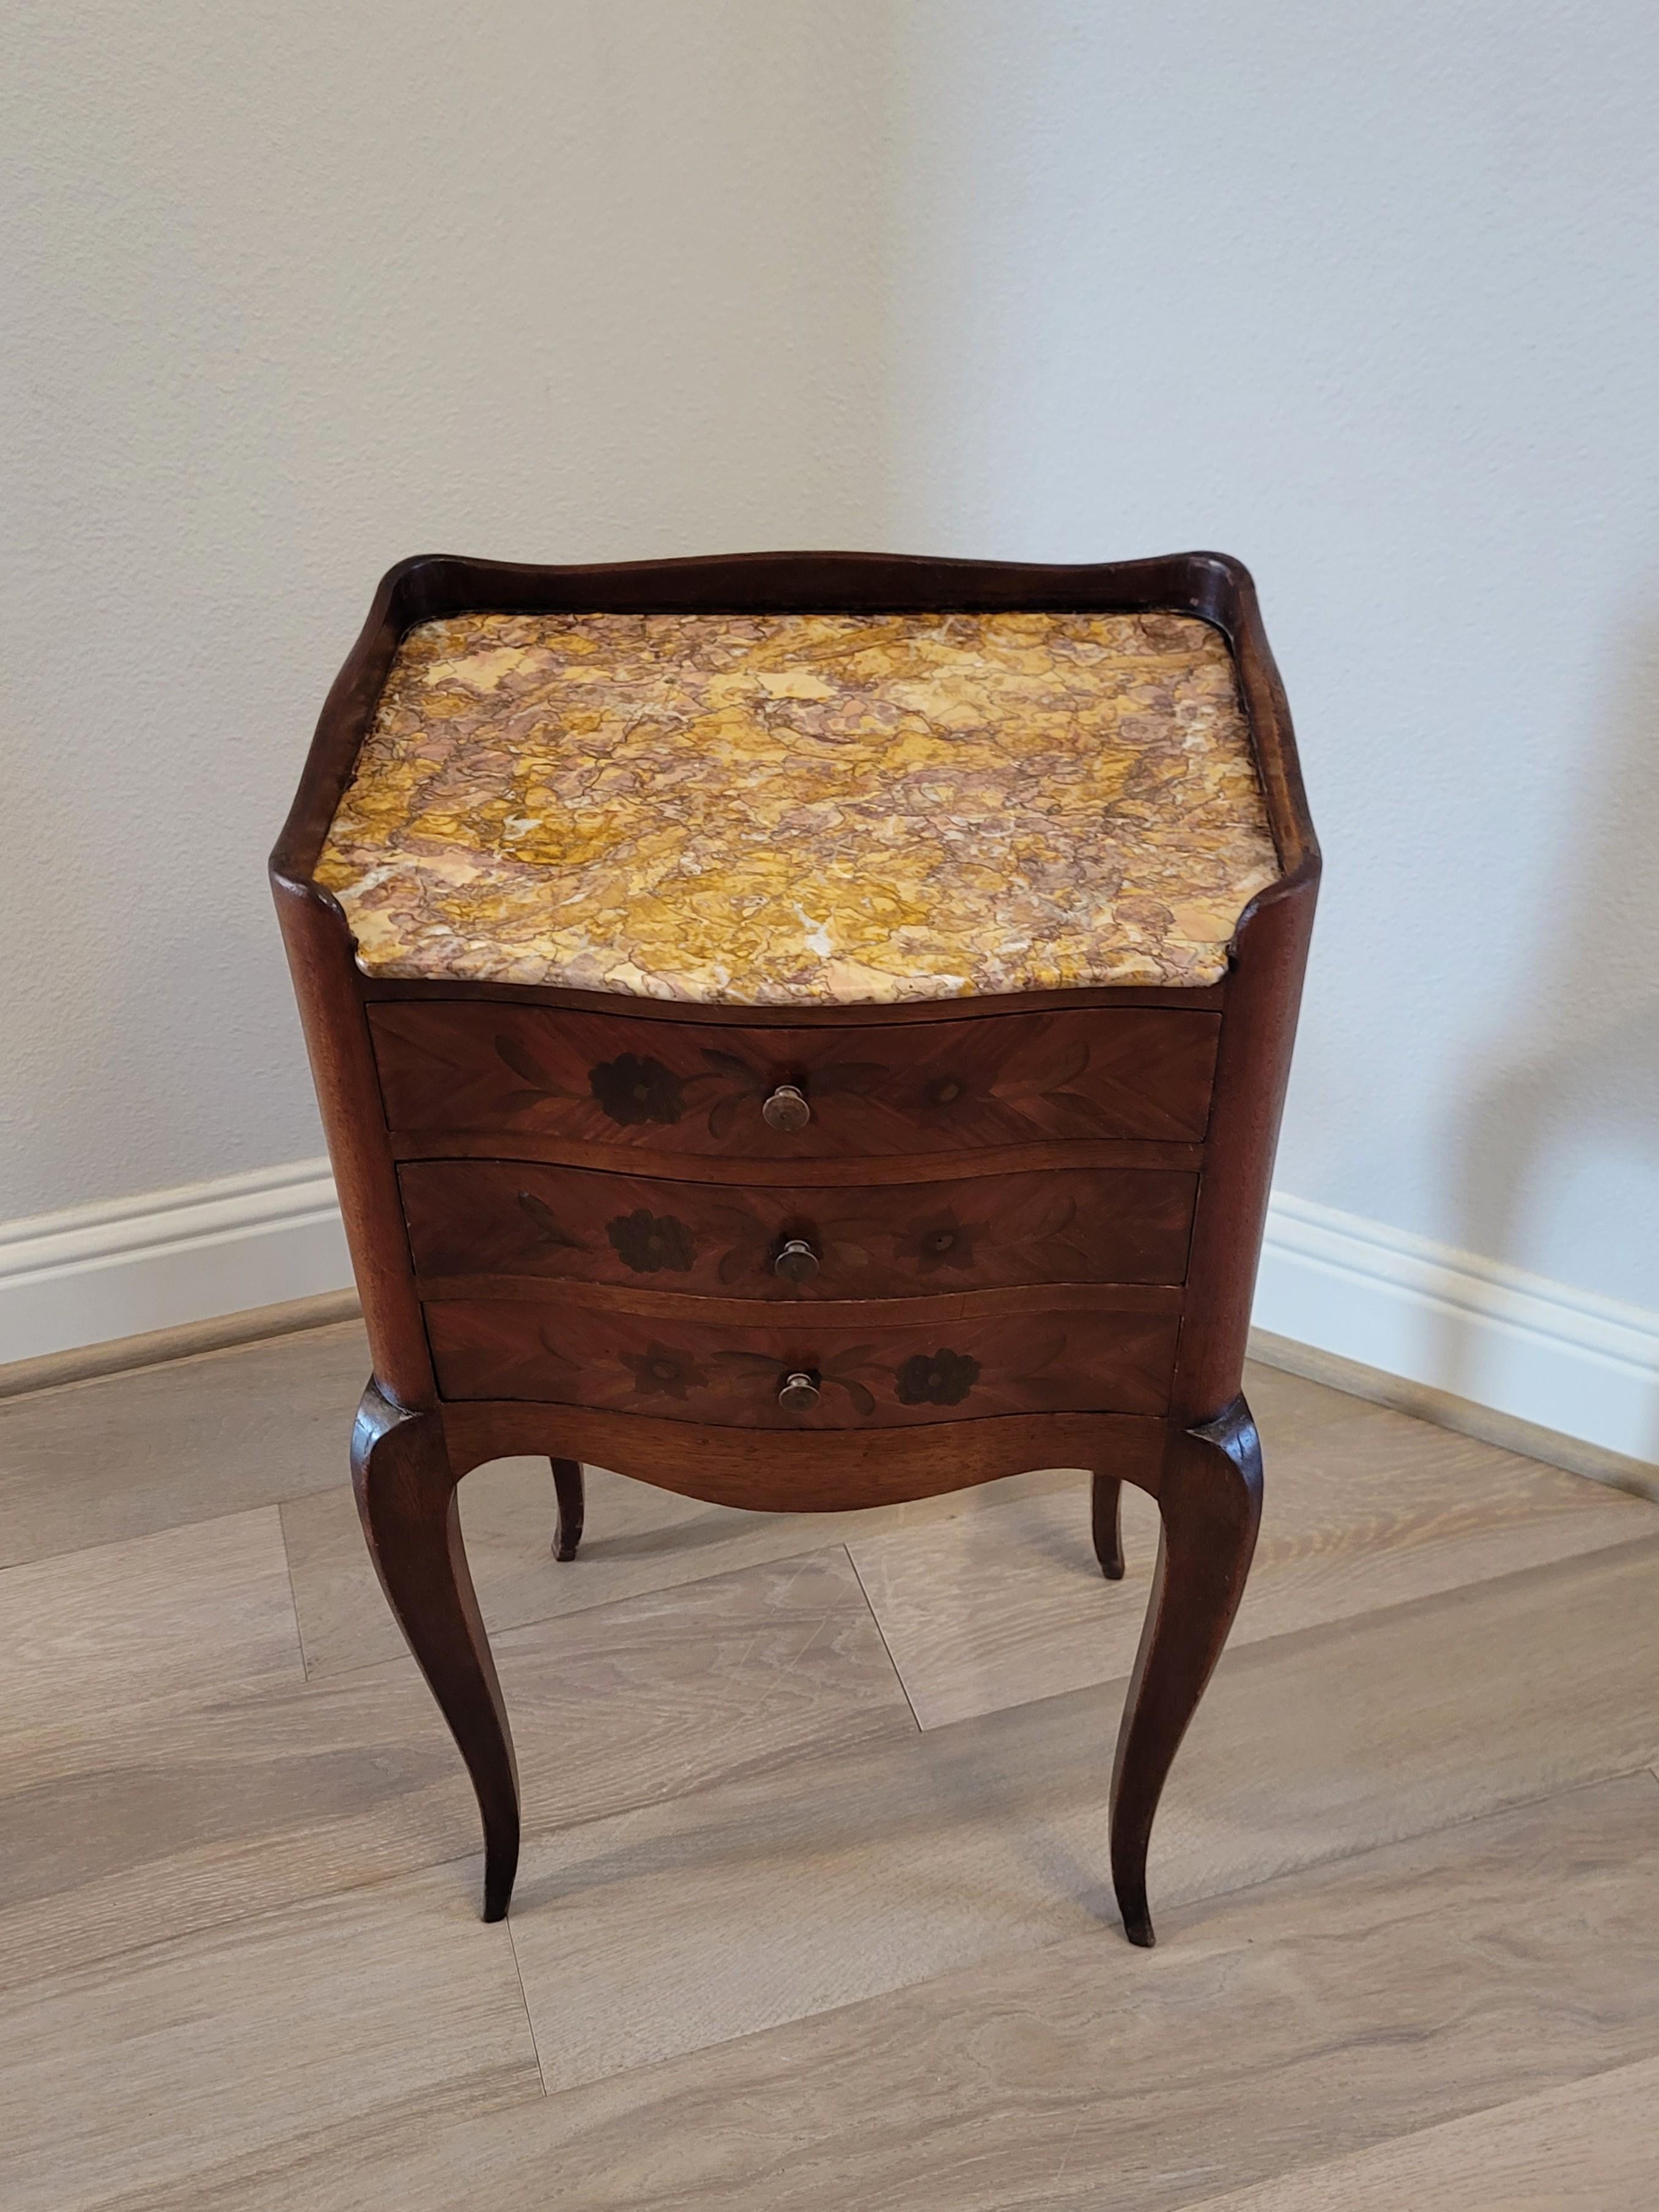 Marble 19th Century French Louis XV Style Marquetry Inlaid Nightstand Table For Sale